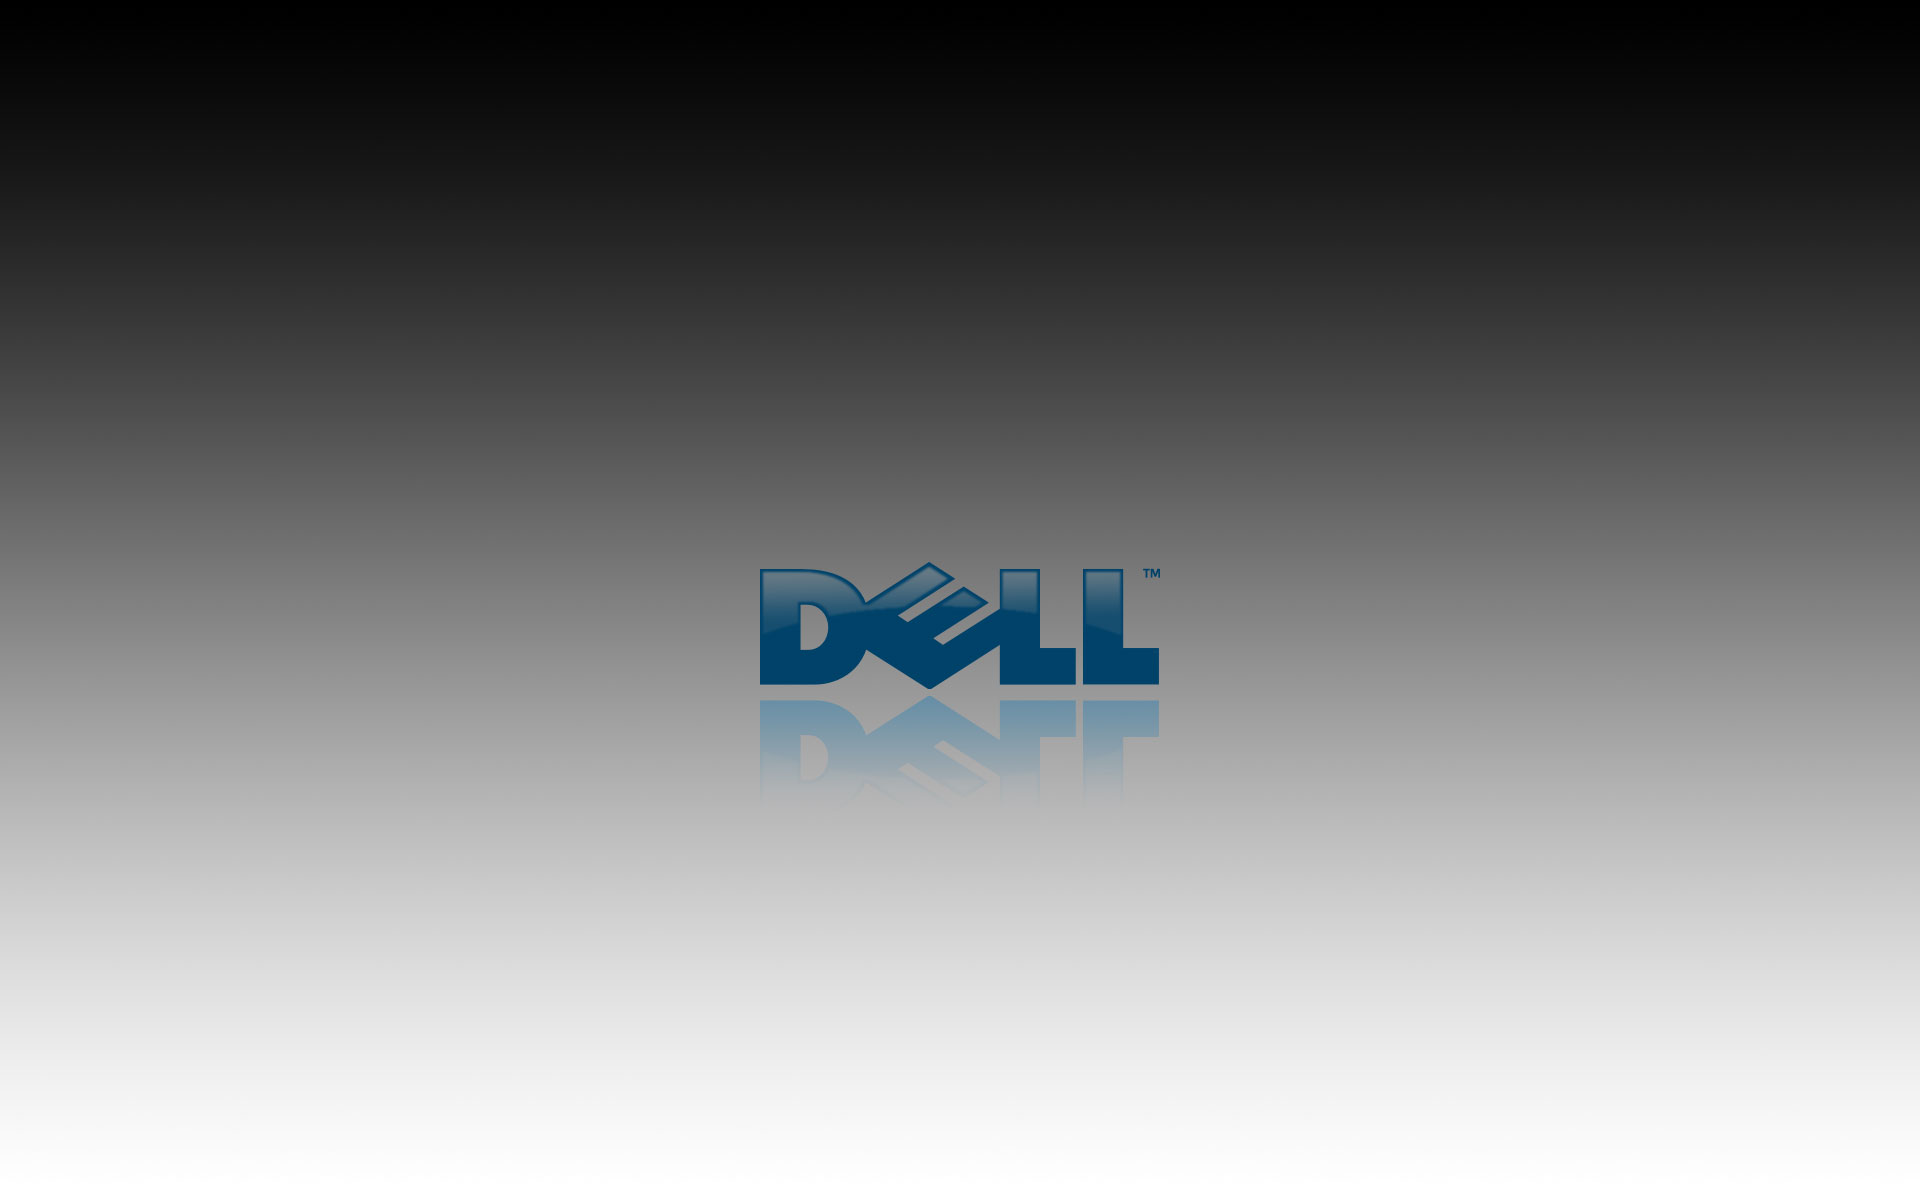 Hd Dell Wallpapers